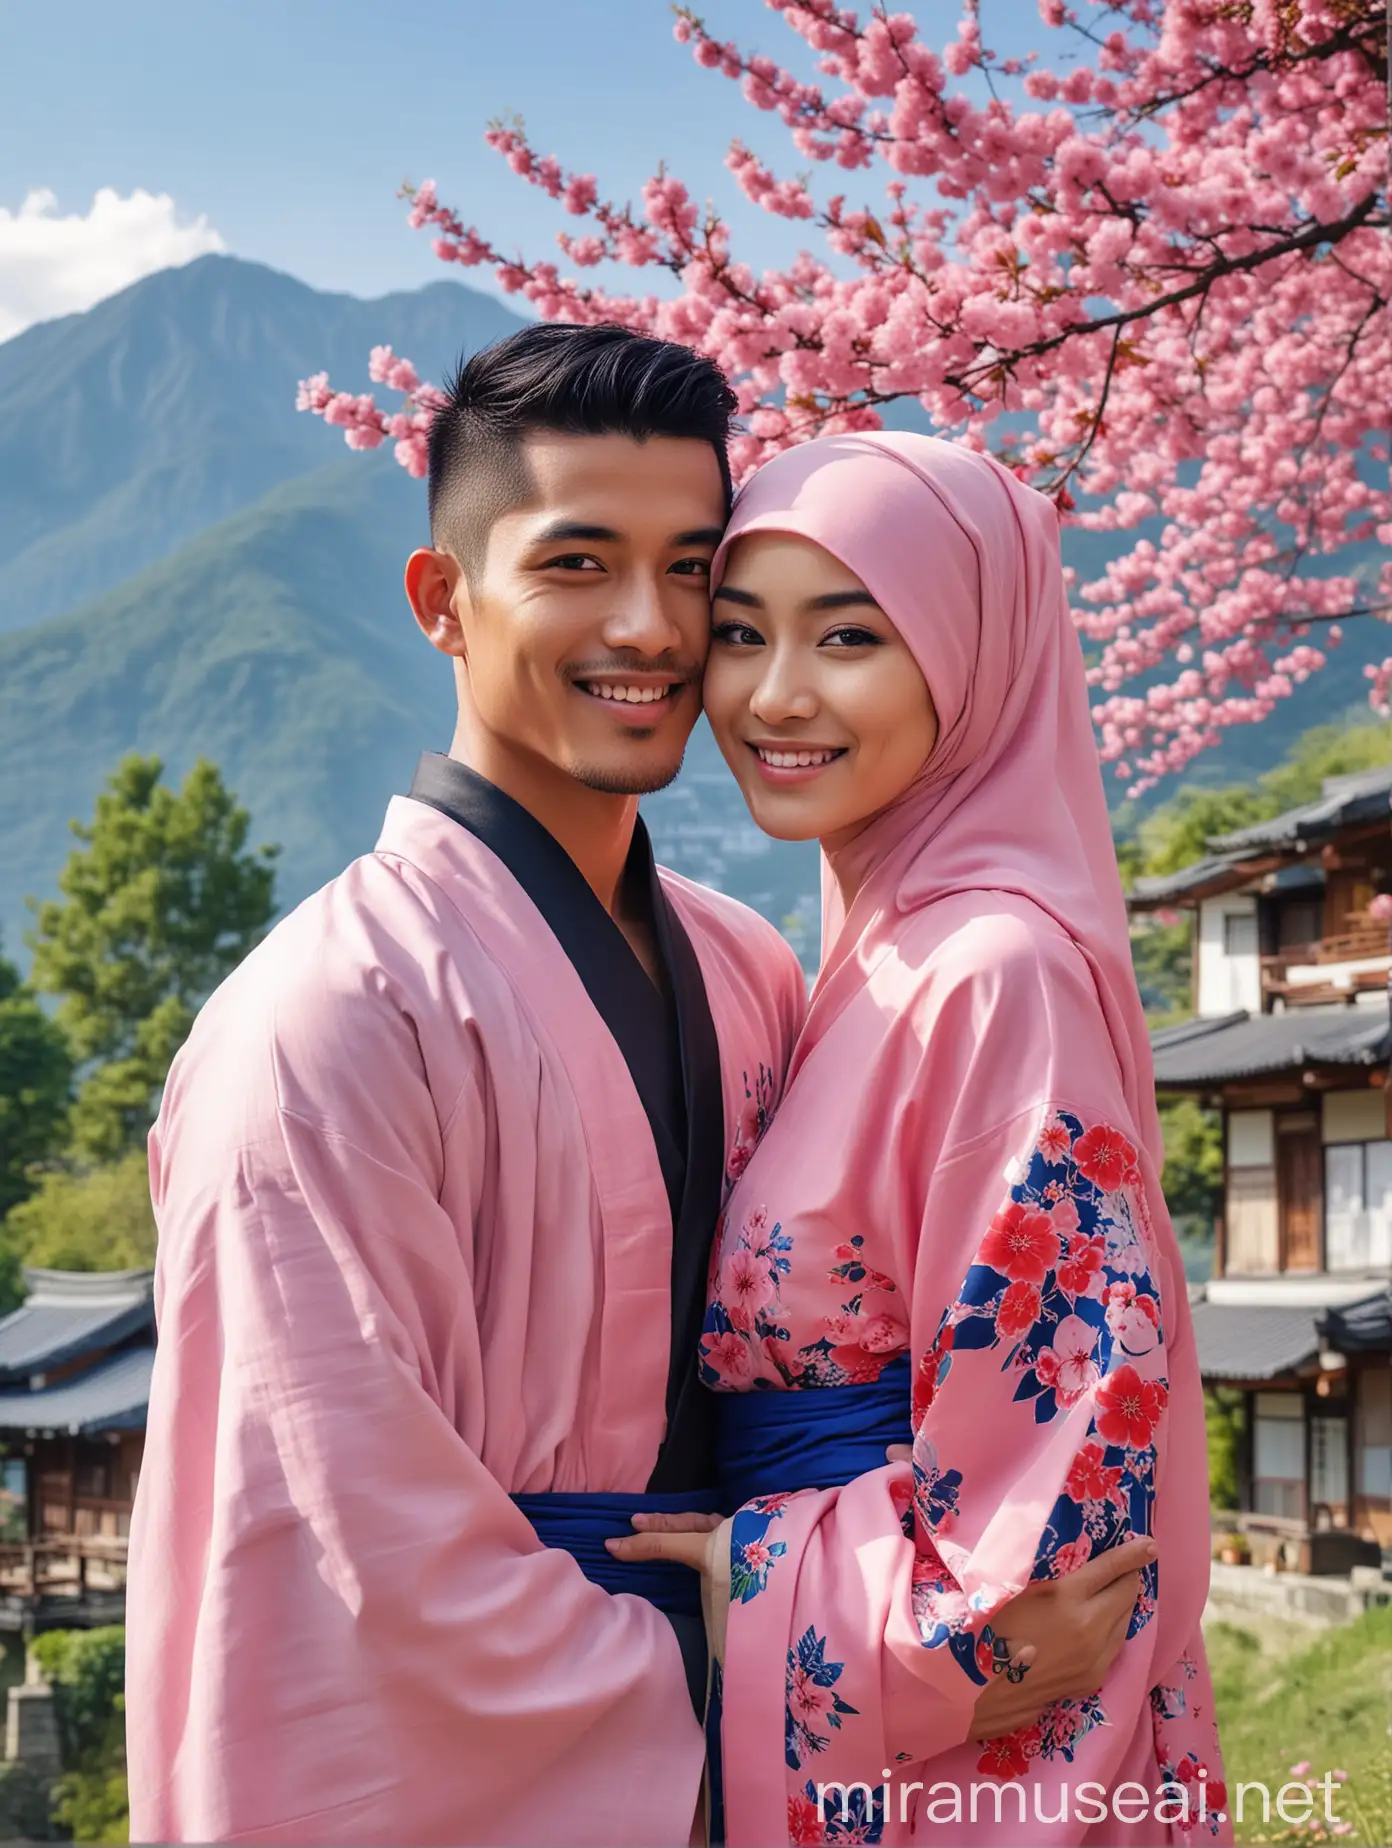 Romantic Indonesian Couples in Traditional Kimono with Cherry Blossom Background